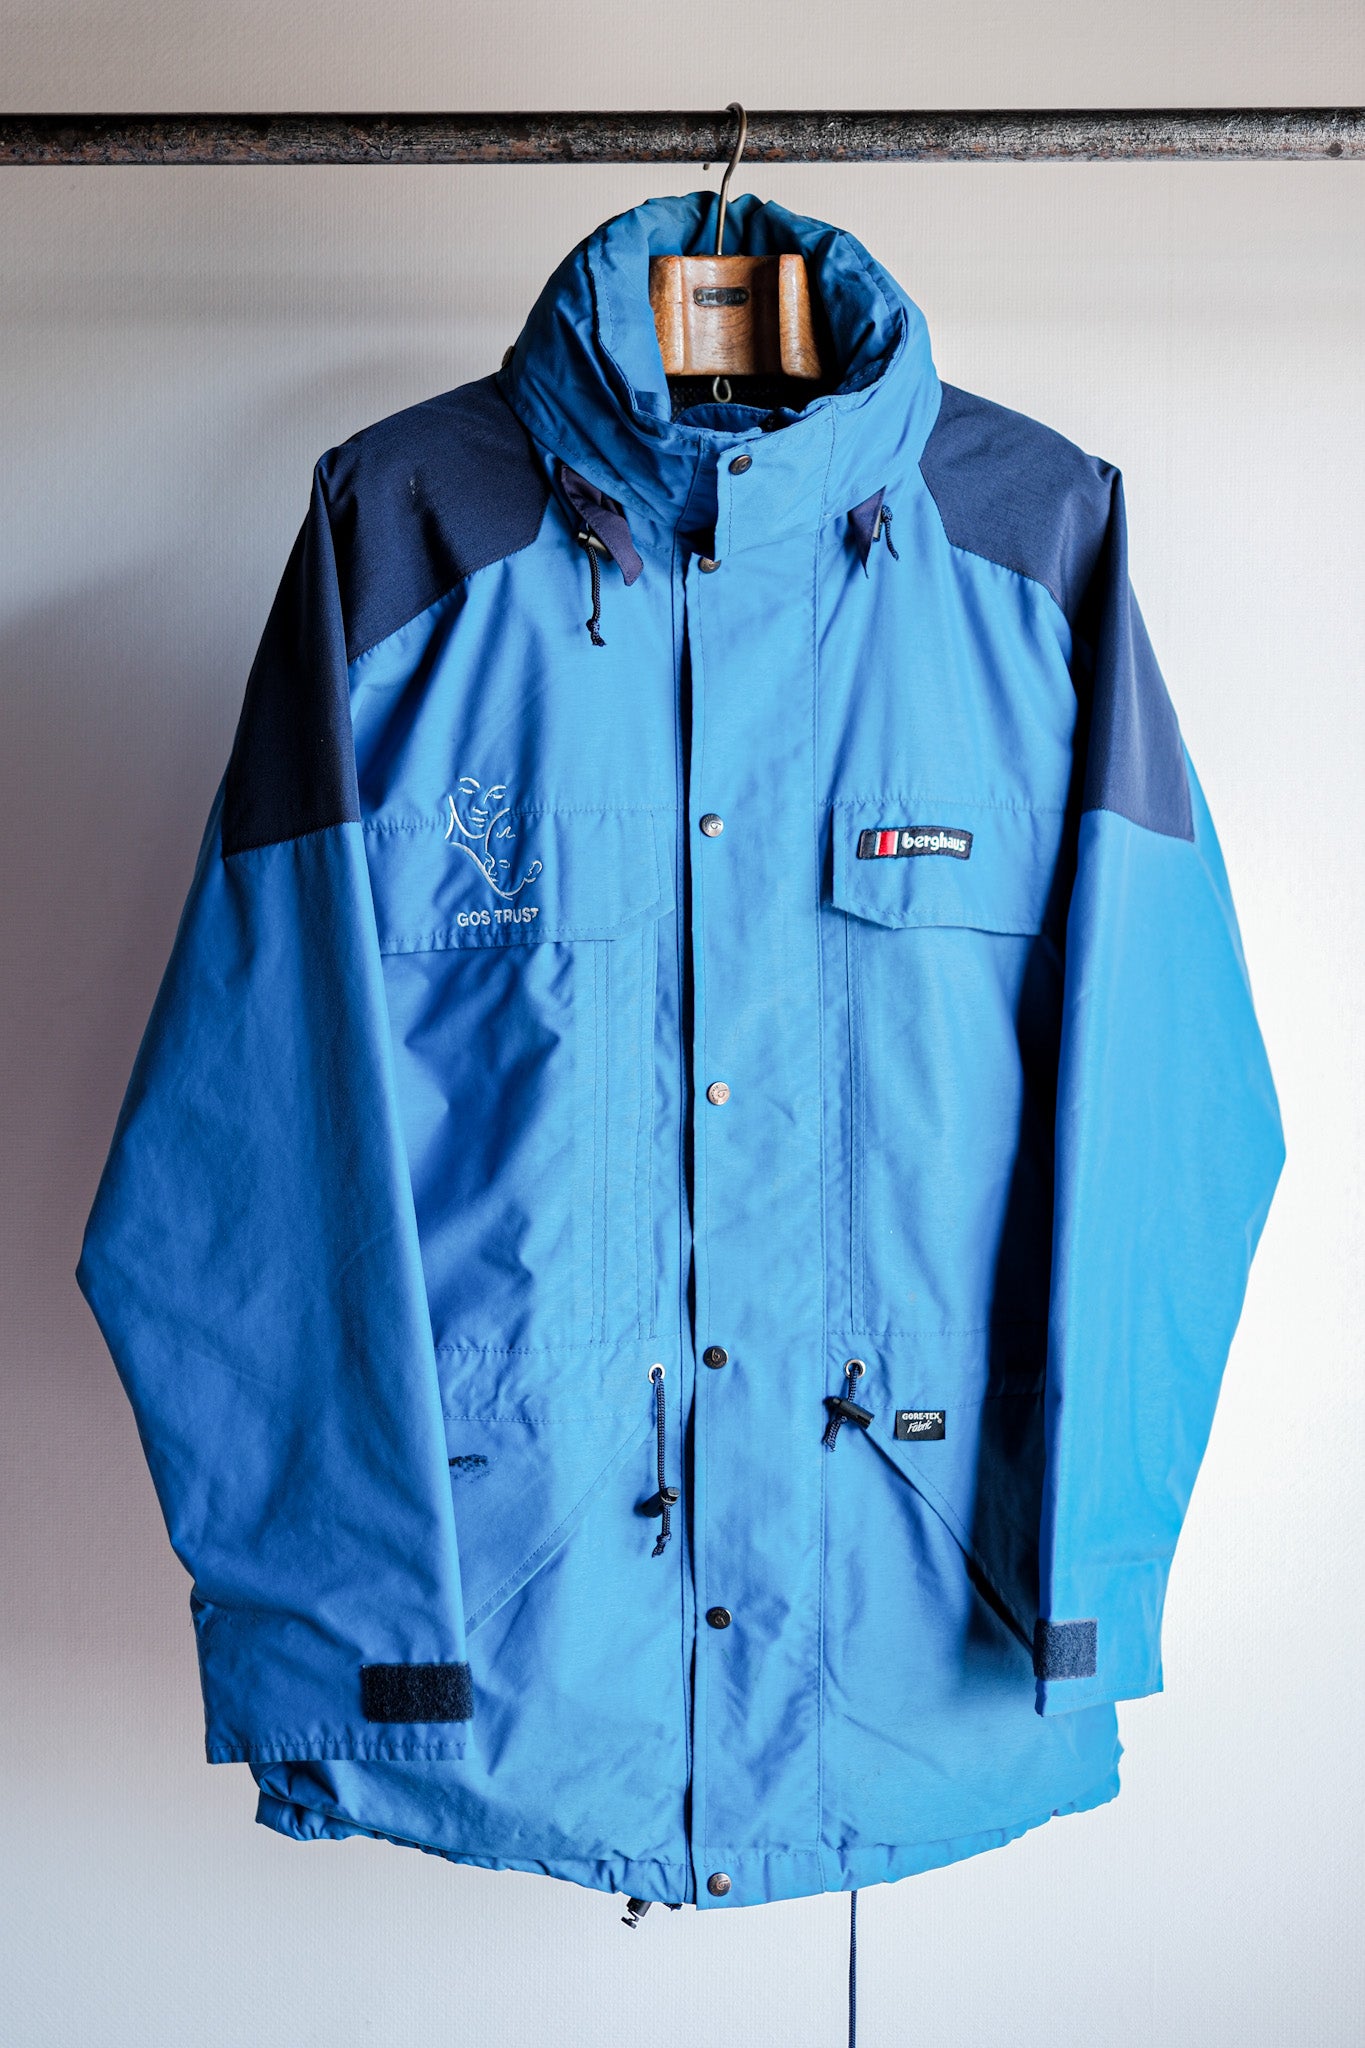 【~90's】Vintage Berghaus GORE-TEX Hiking Jacket Size.Small